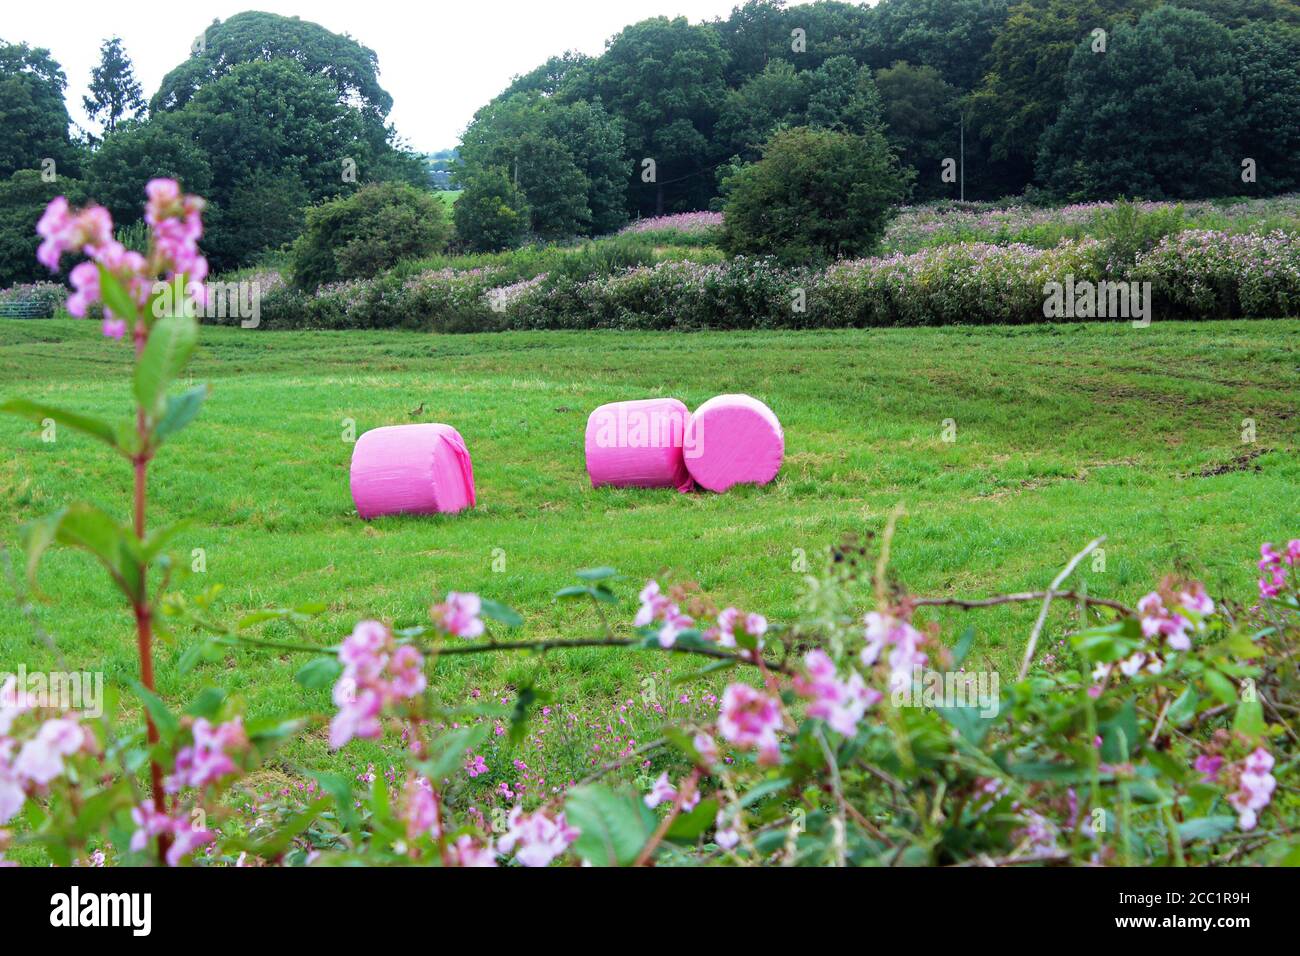 Pink wrapped hay bales in Dean gate farm's field behind pink wild flowers on Winter hill, England Stock Photo